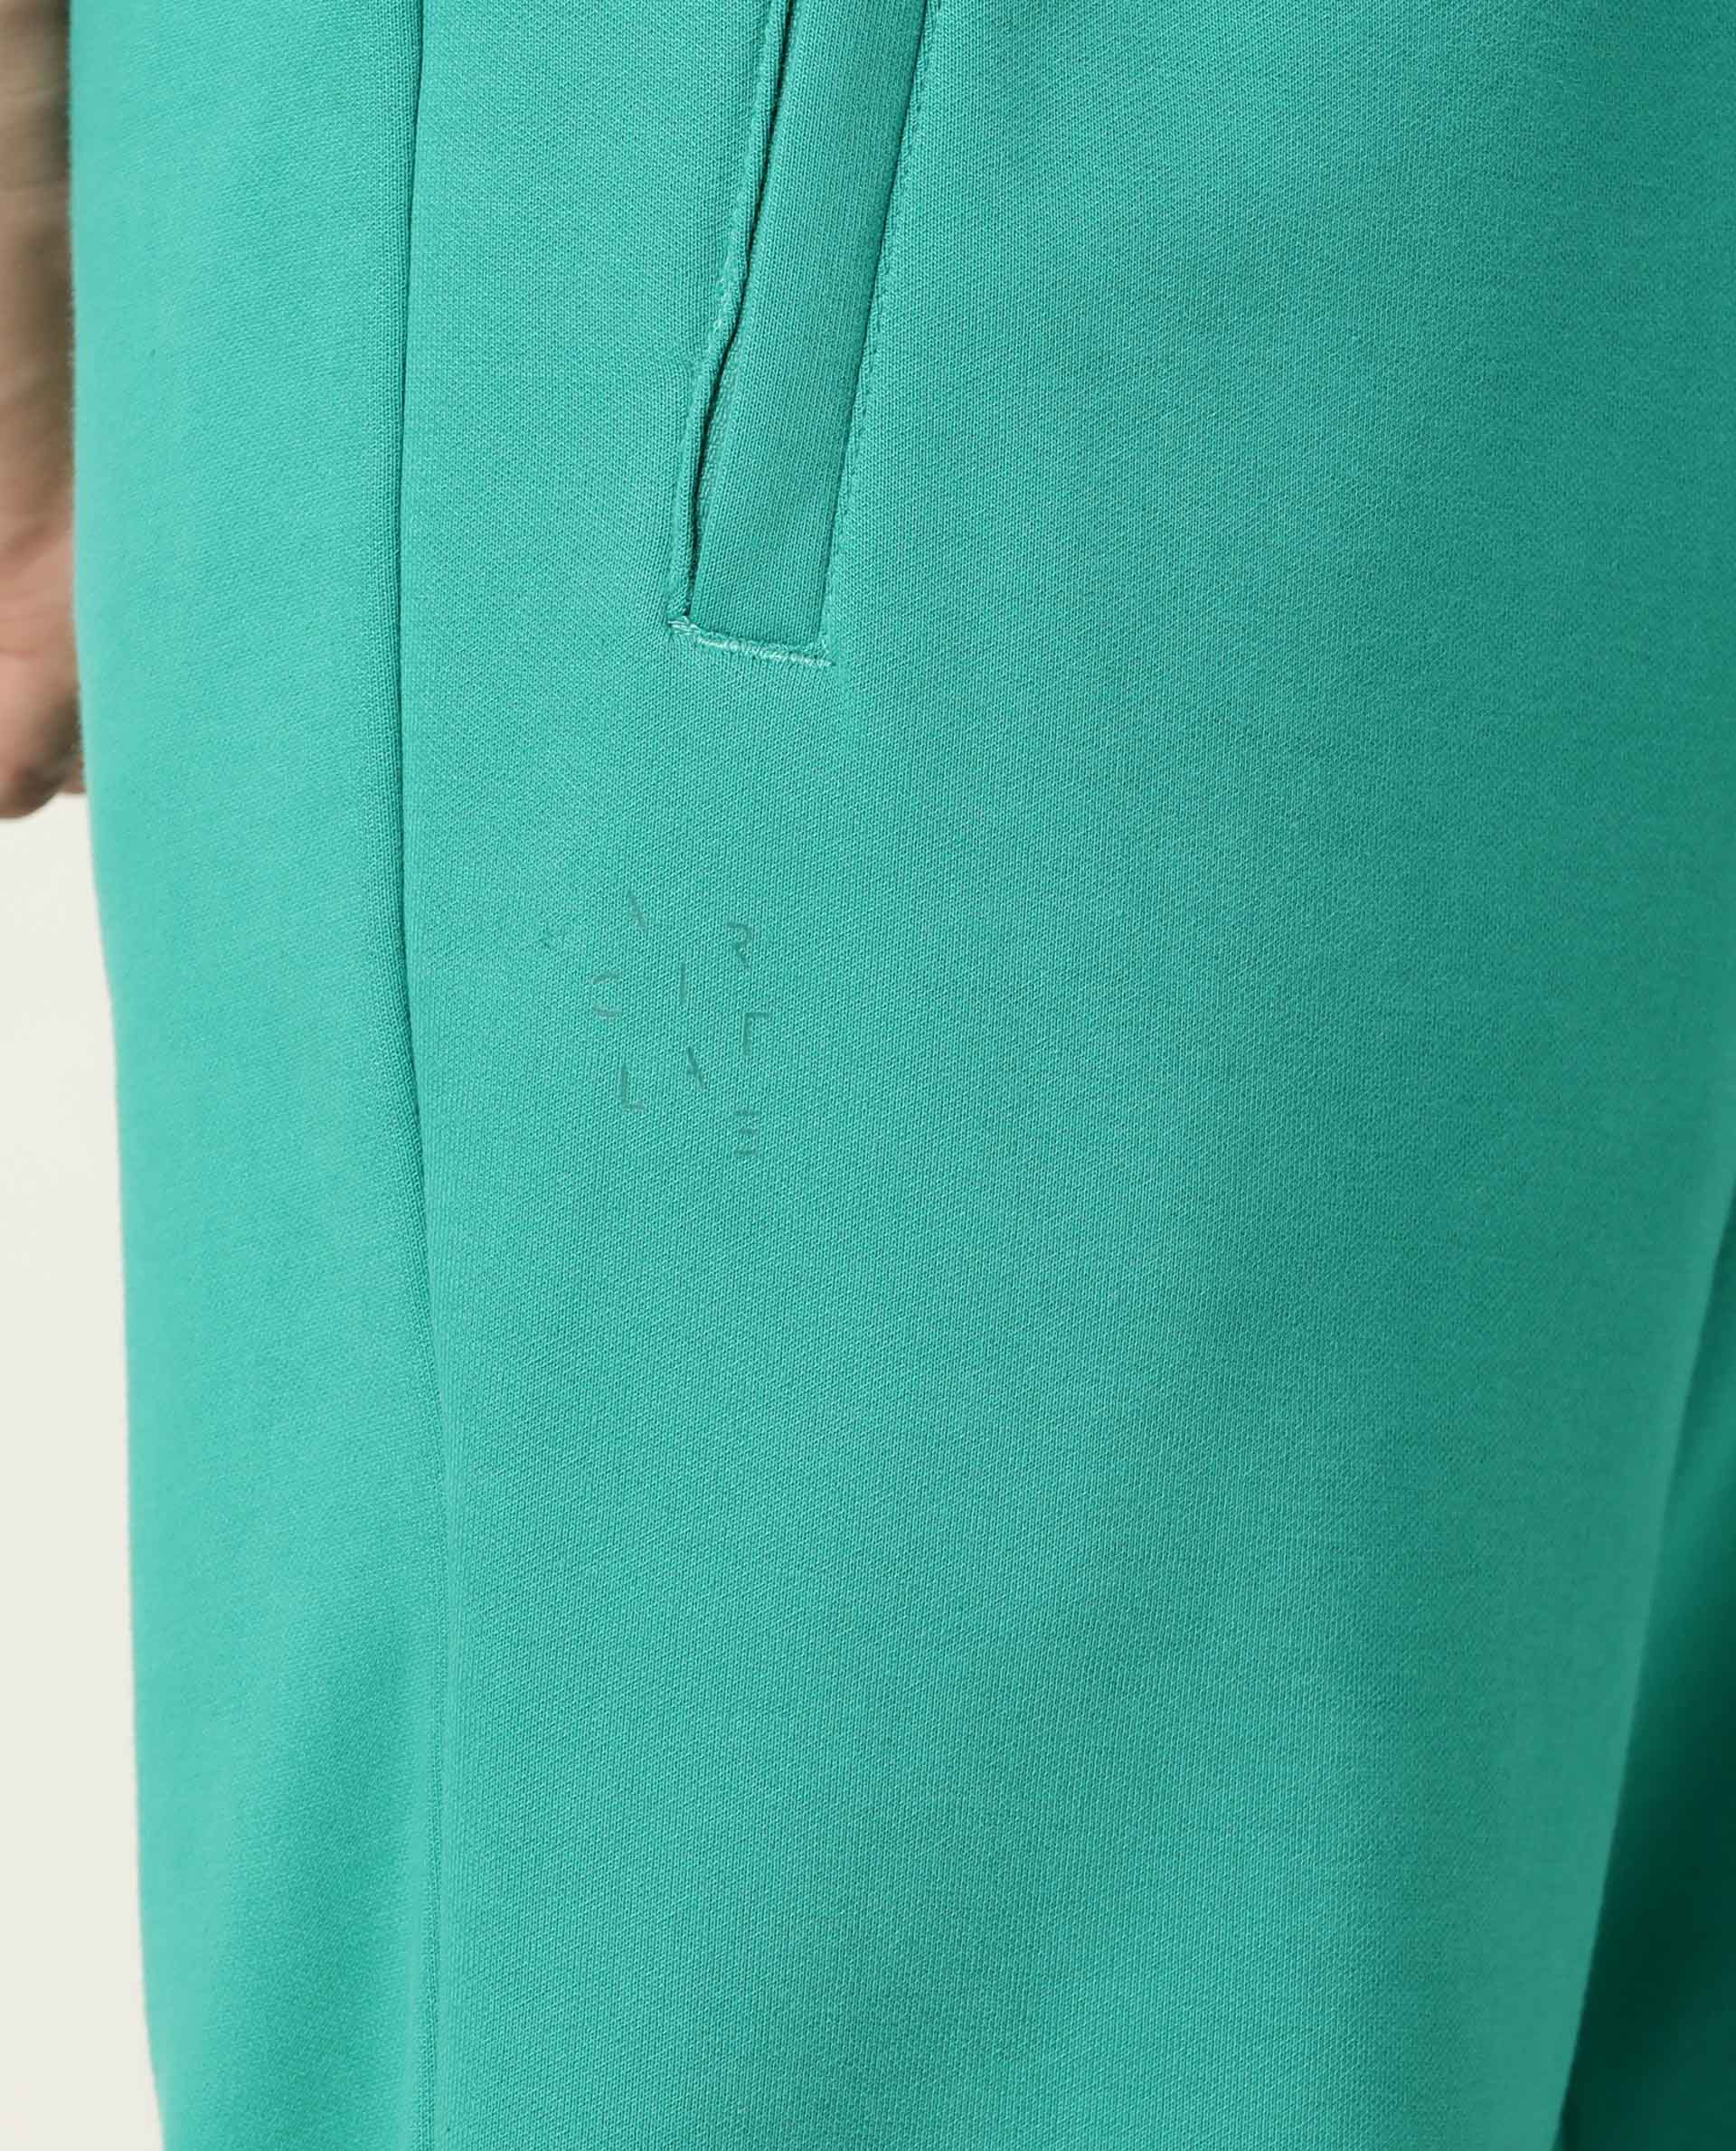 Green Trousers  Buy Green Trousers Online Starting at Just 294  Meesho